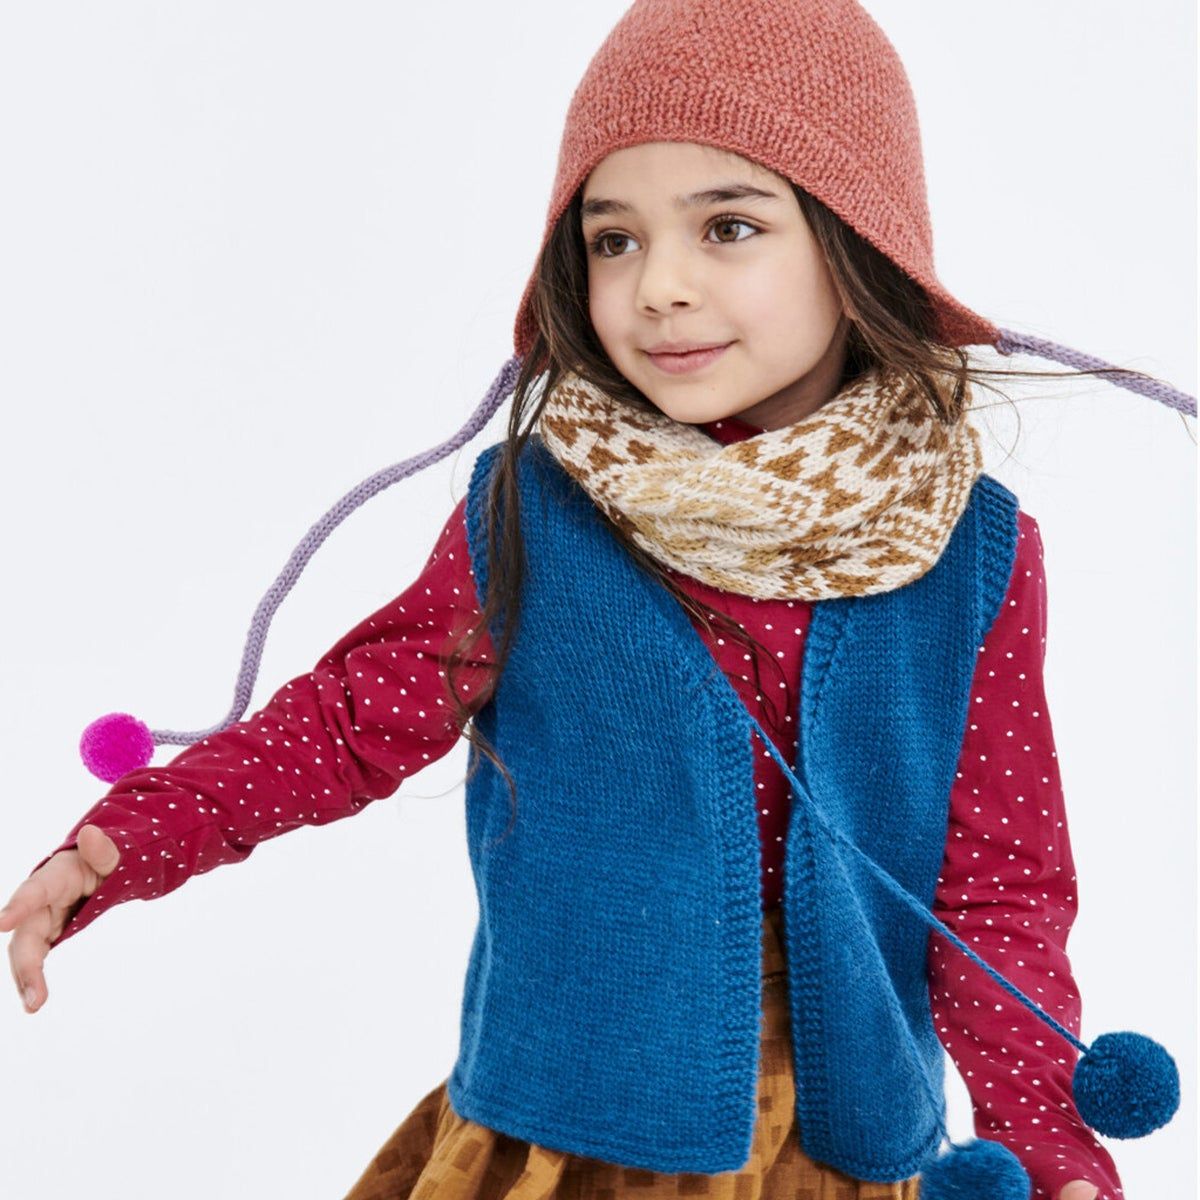 A little girl in a knit scarf, hat and vest